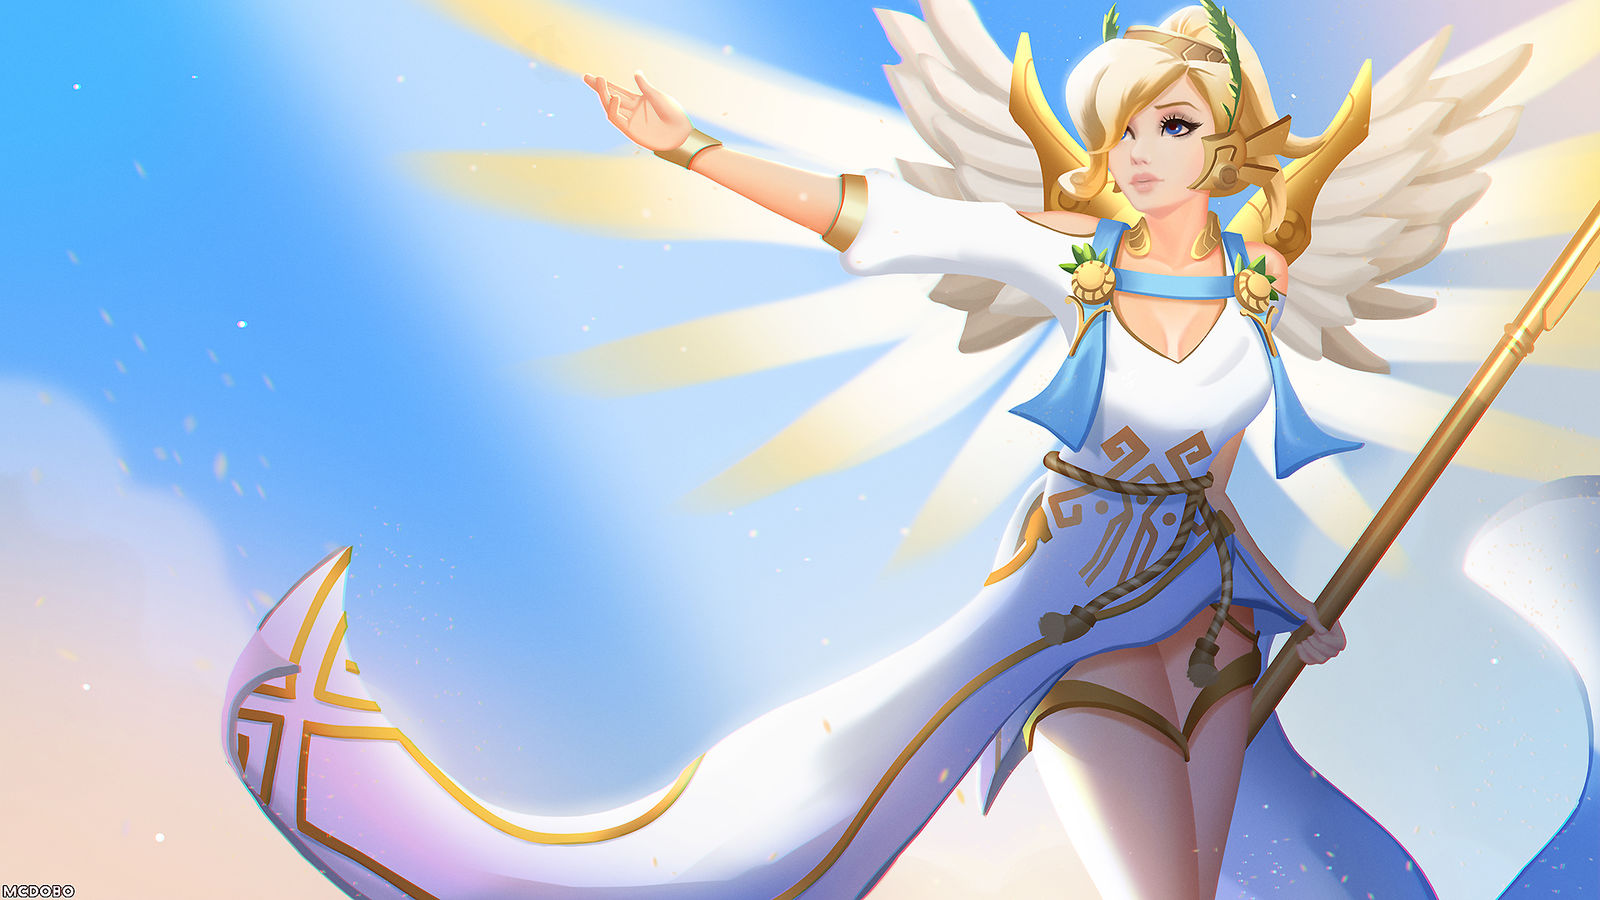 Winged Victory Mercy